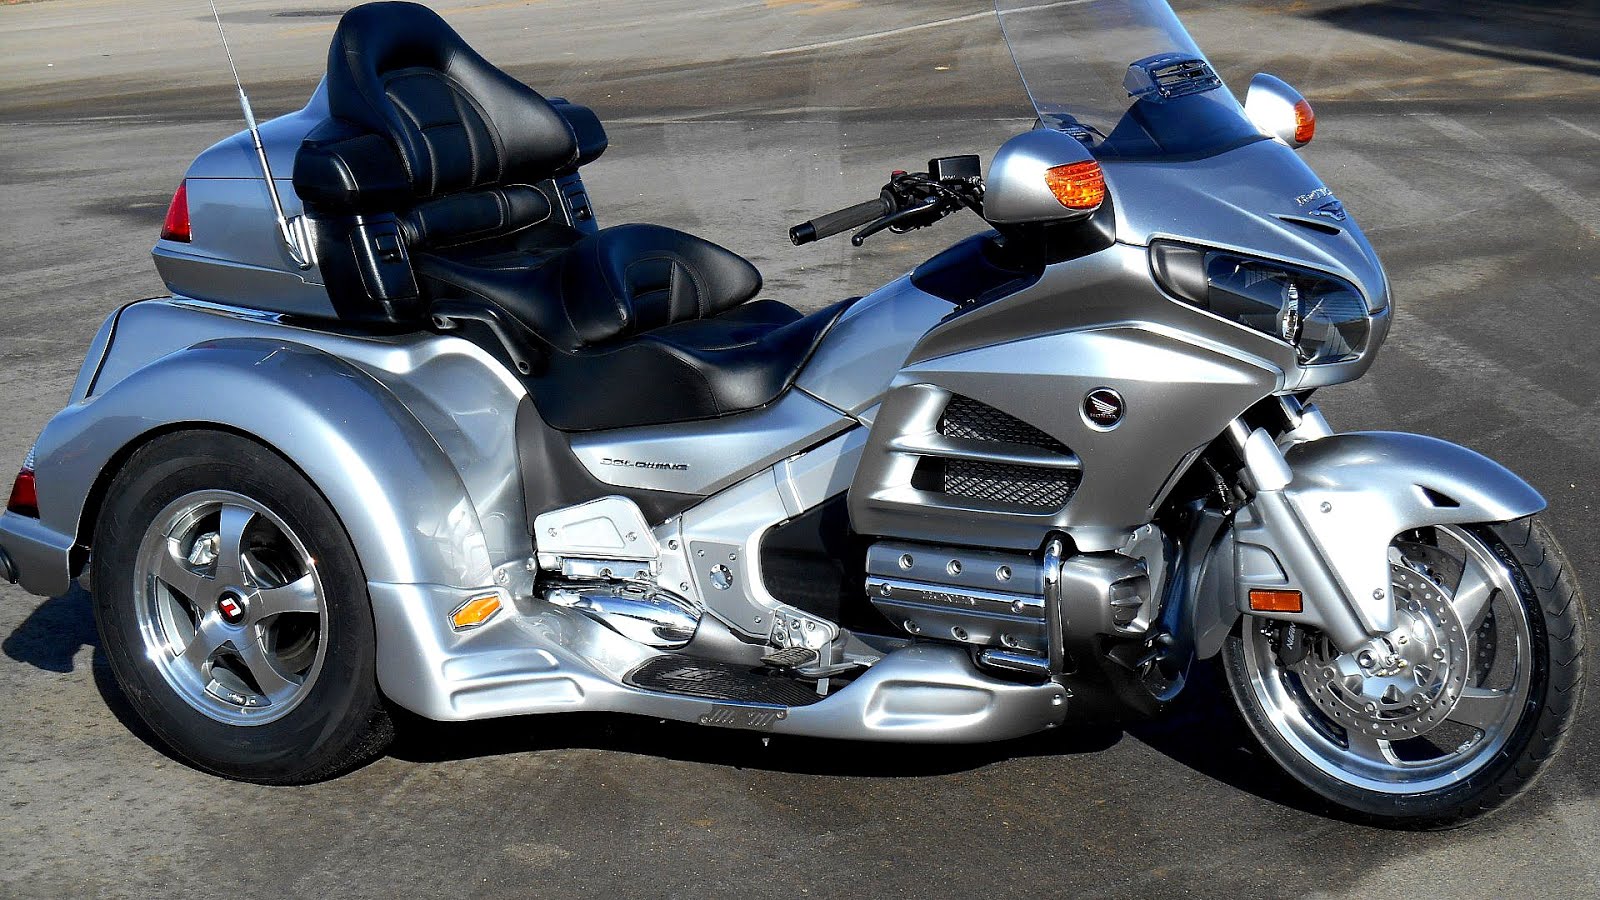 Used Goldwing Trikes For Sale - www.inf-inet.com